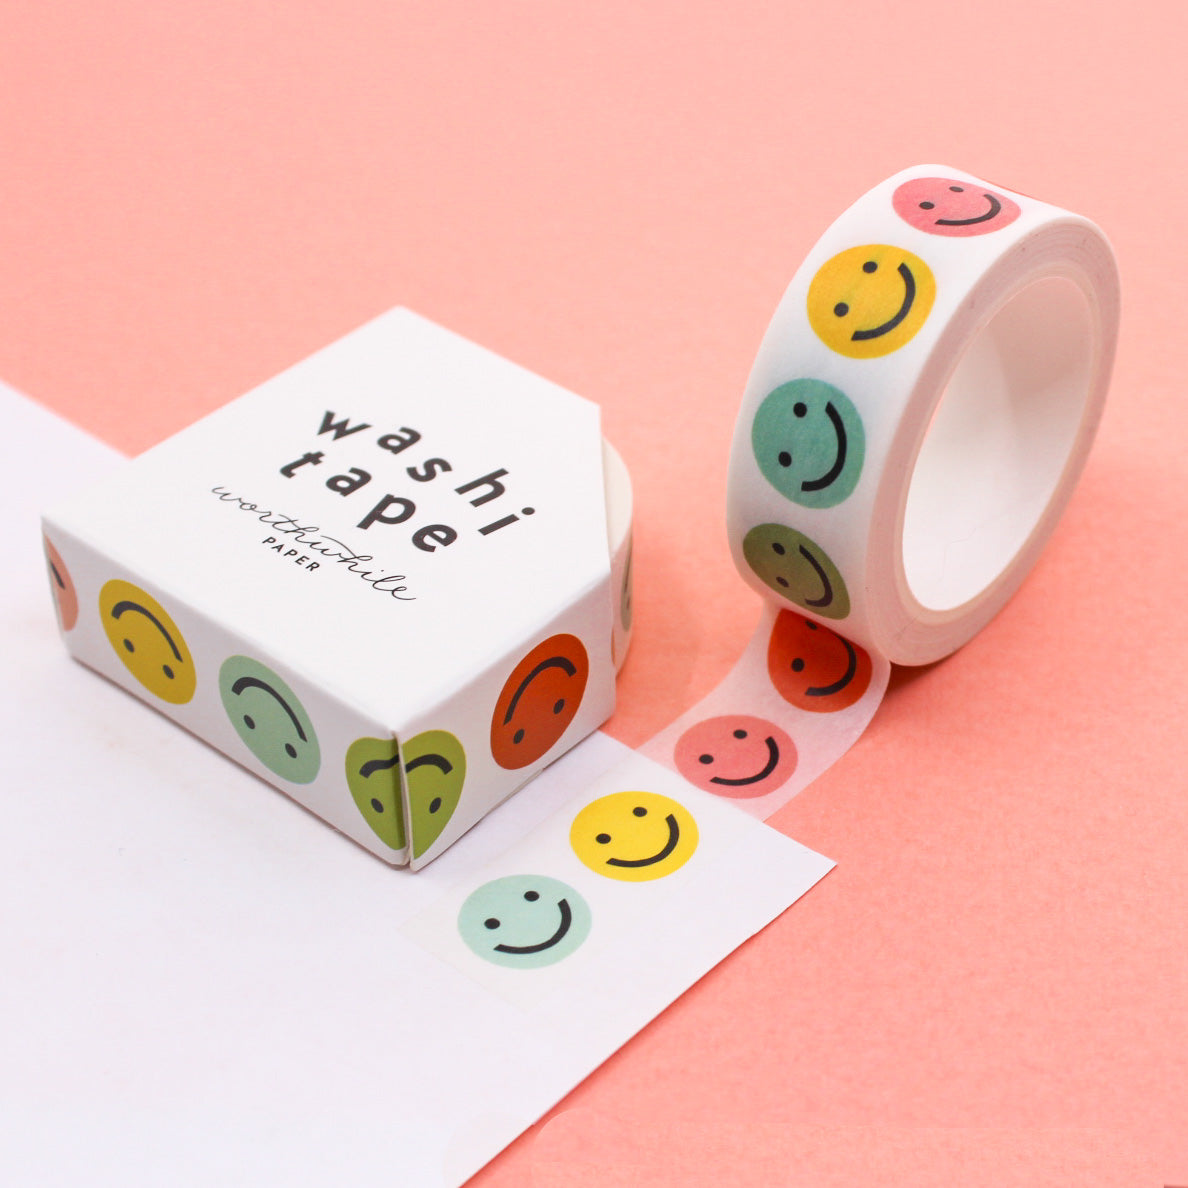 Vibrant Rainbow Colors Smiley Face Washi Tape, featuring cheerful expressions on a colorful background, adding a playful touch to your creative projects. This tape is from Worthwhile Papers and sold at BBB Supplies Craft Shop. 